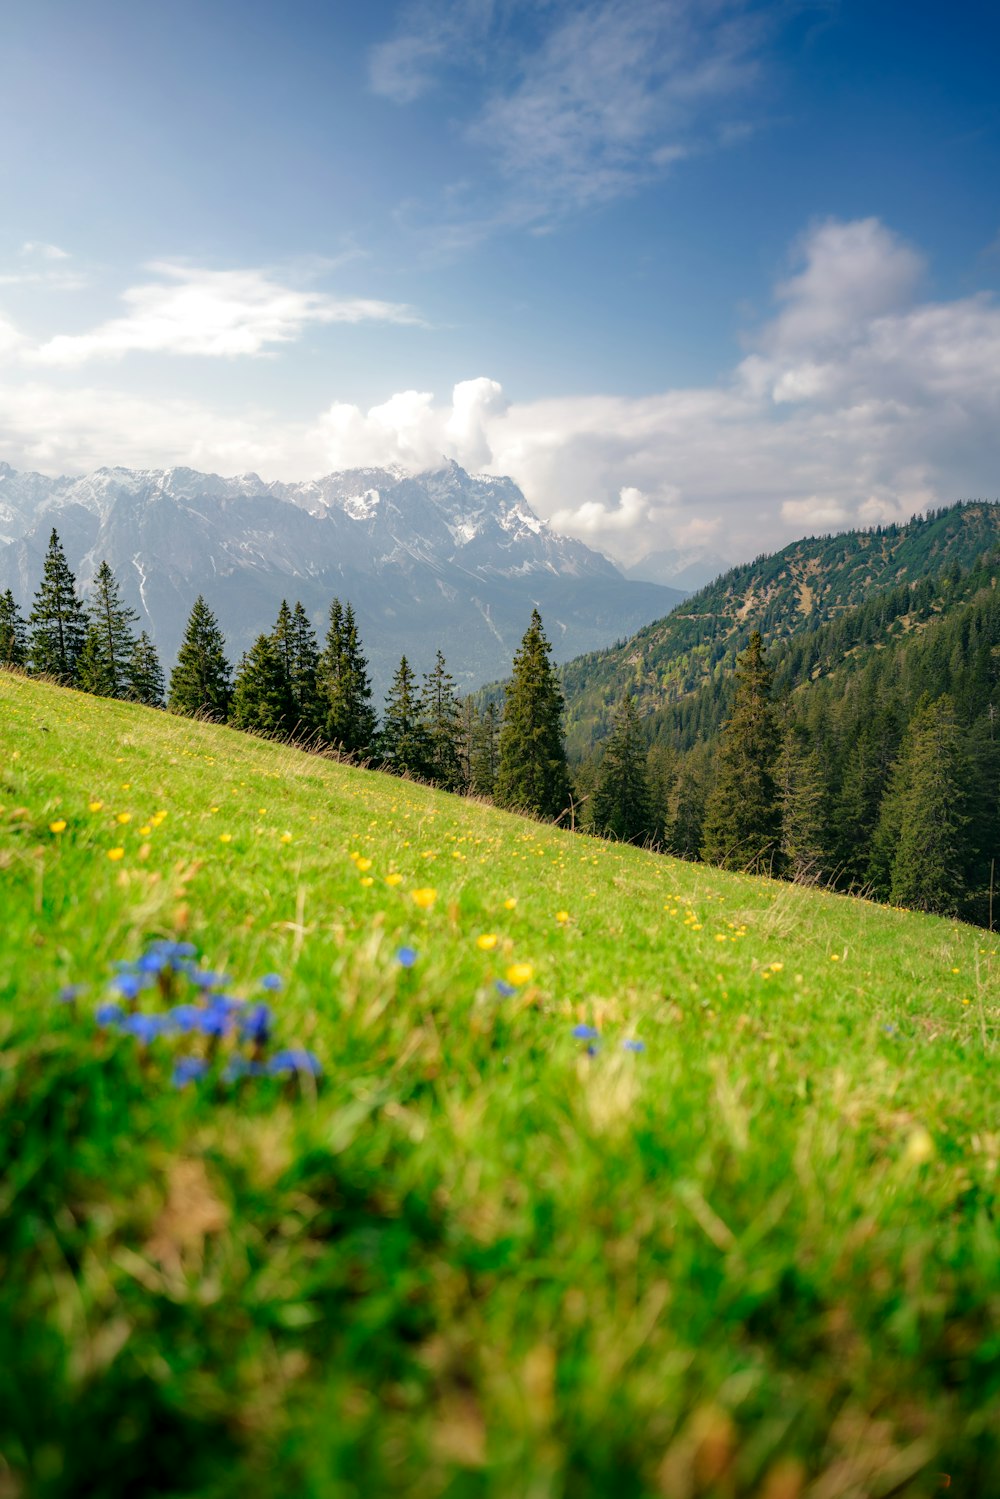 a grassy field with blue flowers and mountains in the background